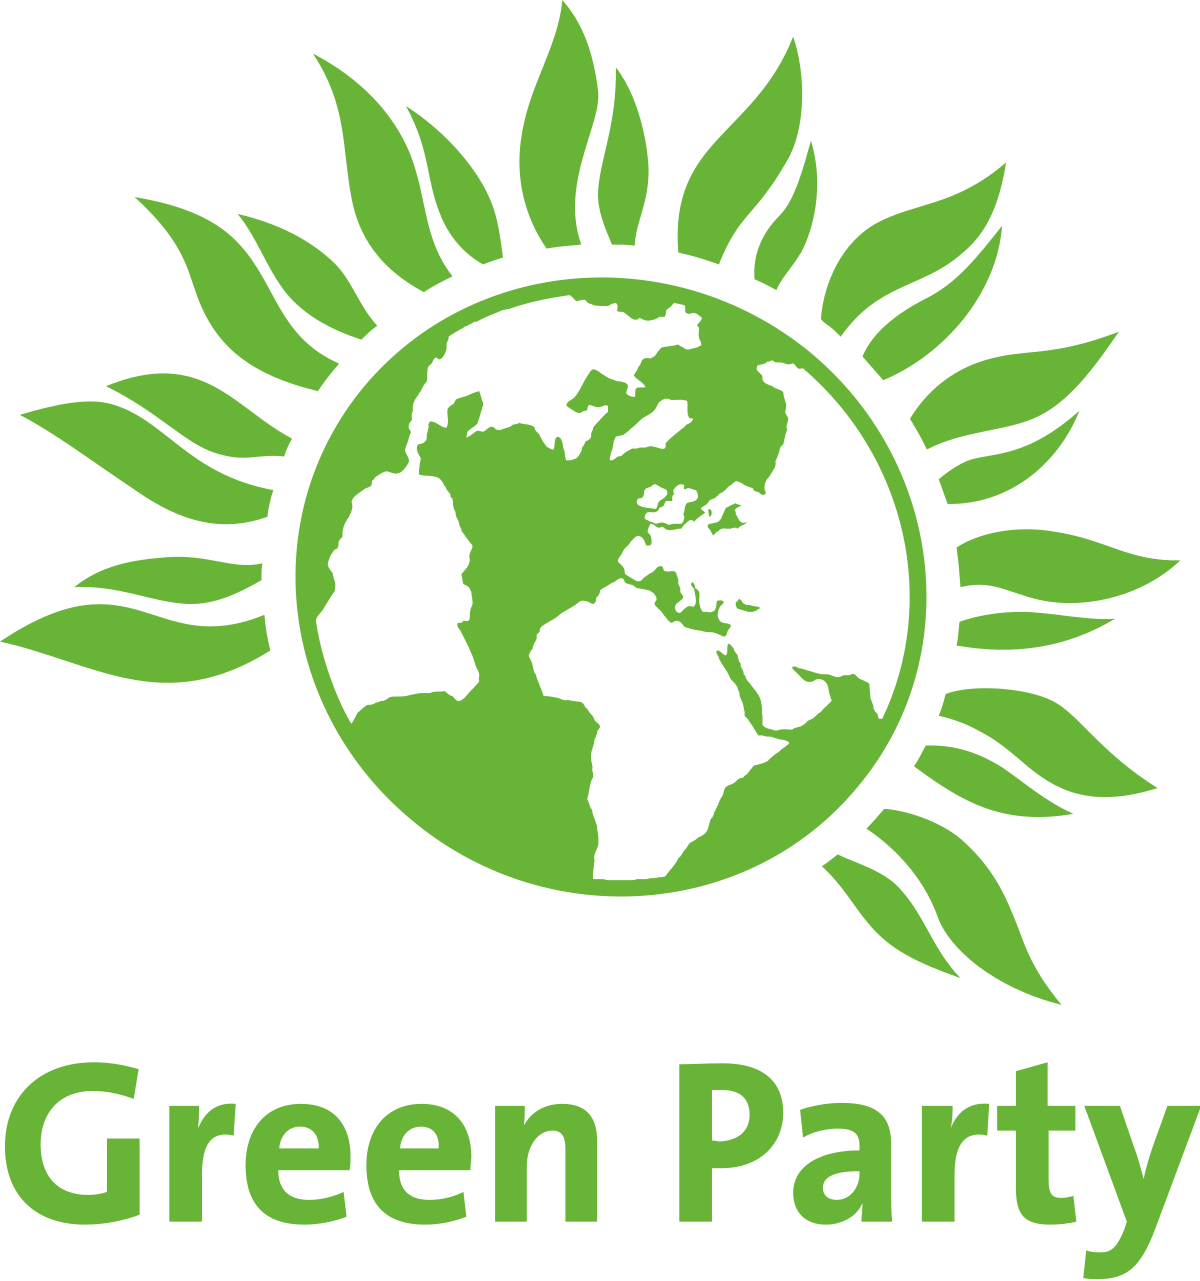 Green MP Logo - Green Party of England and Wales